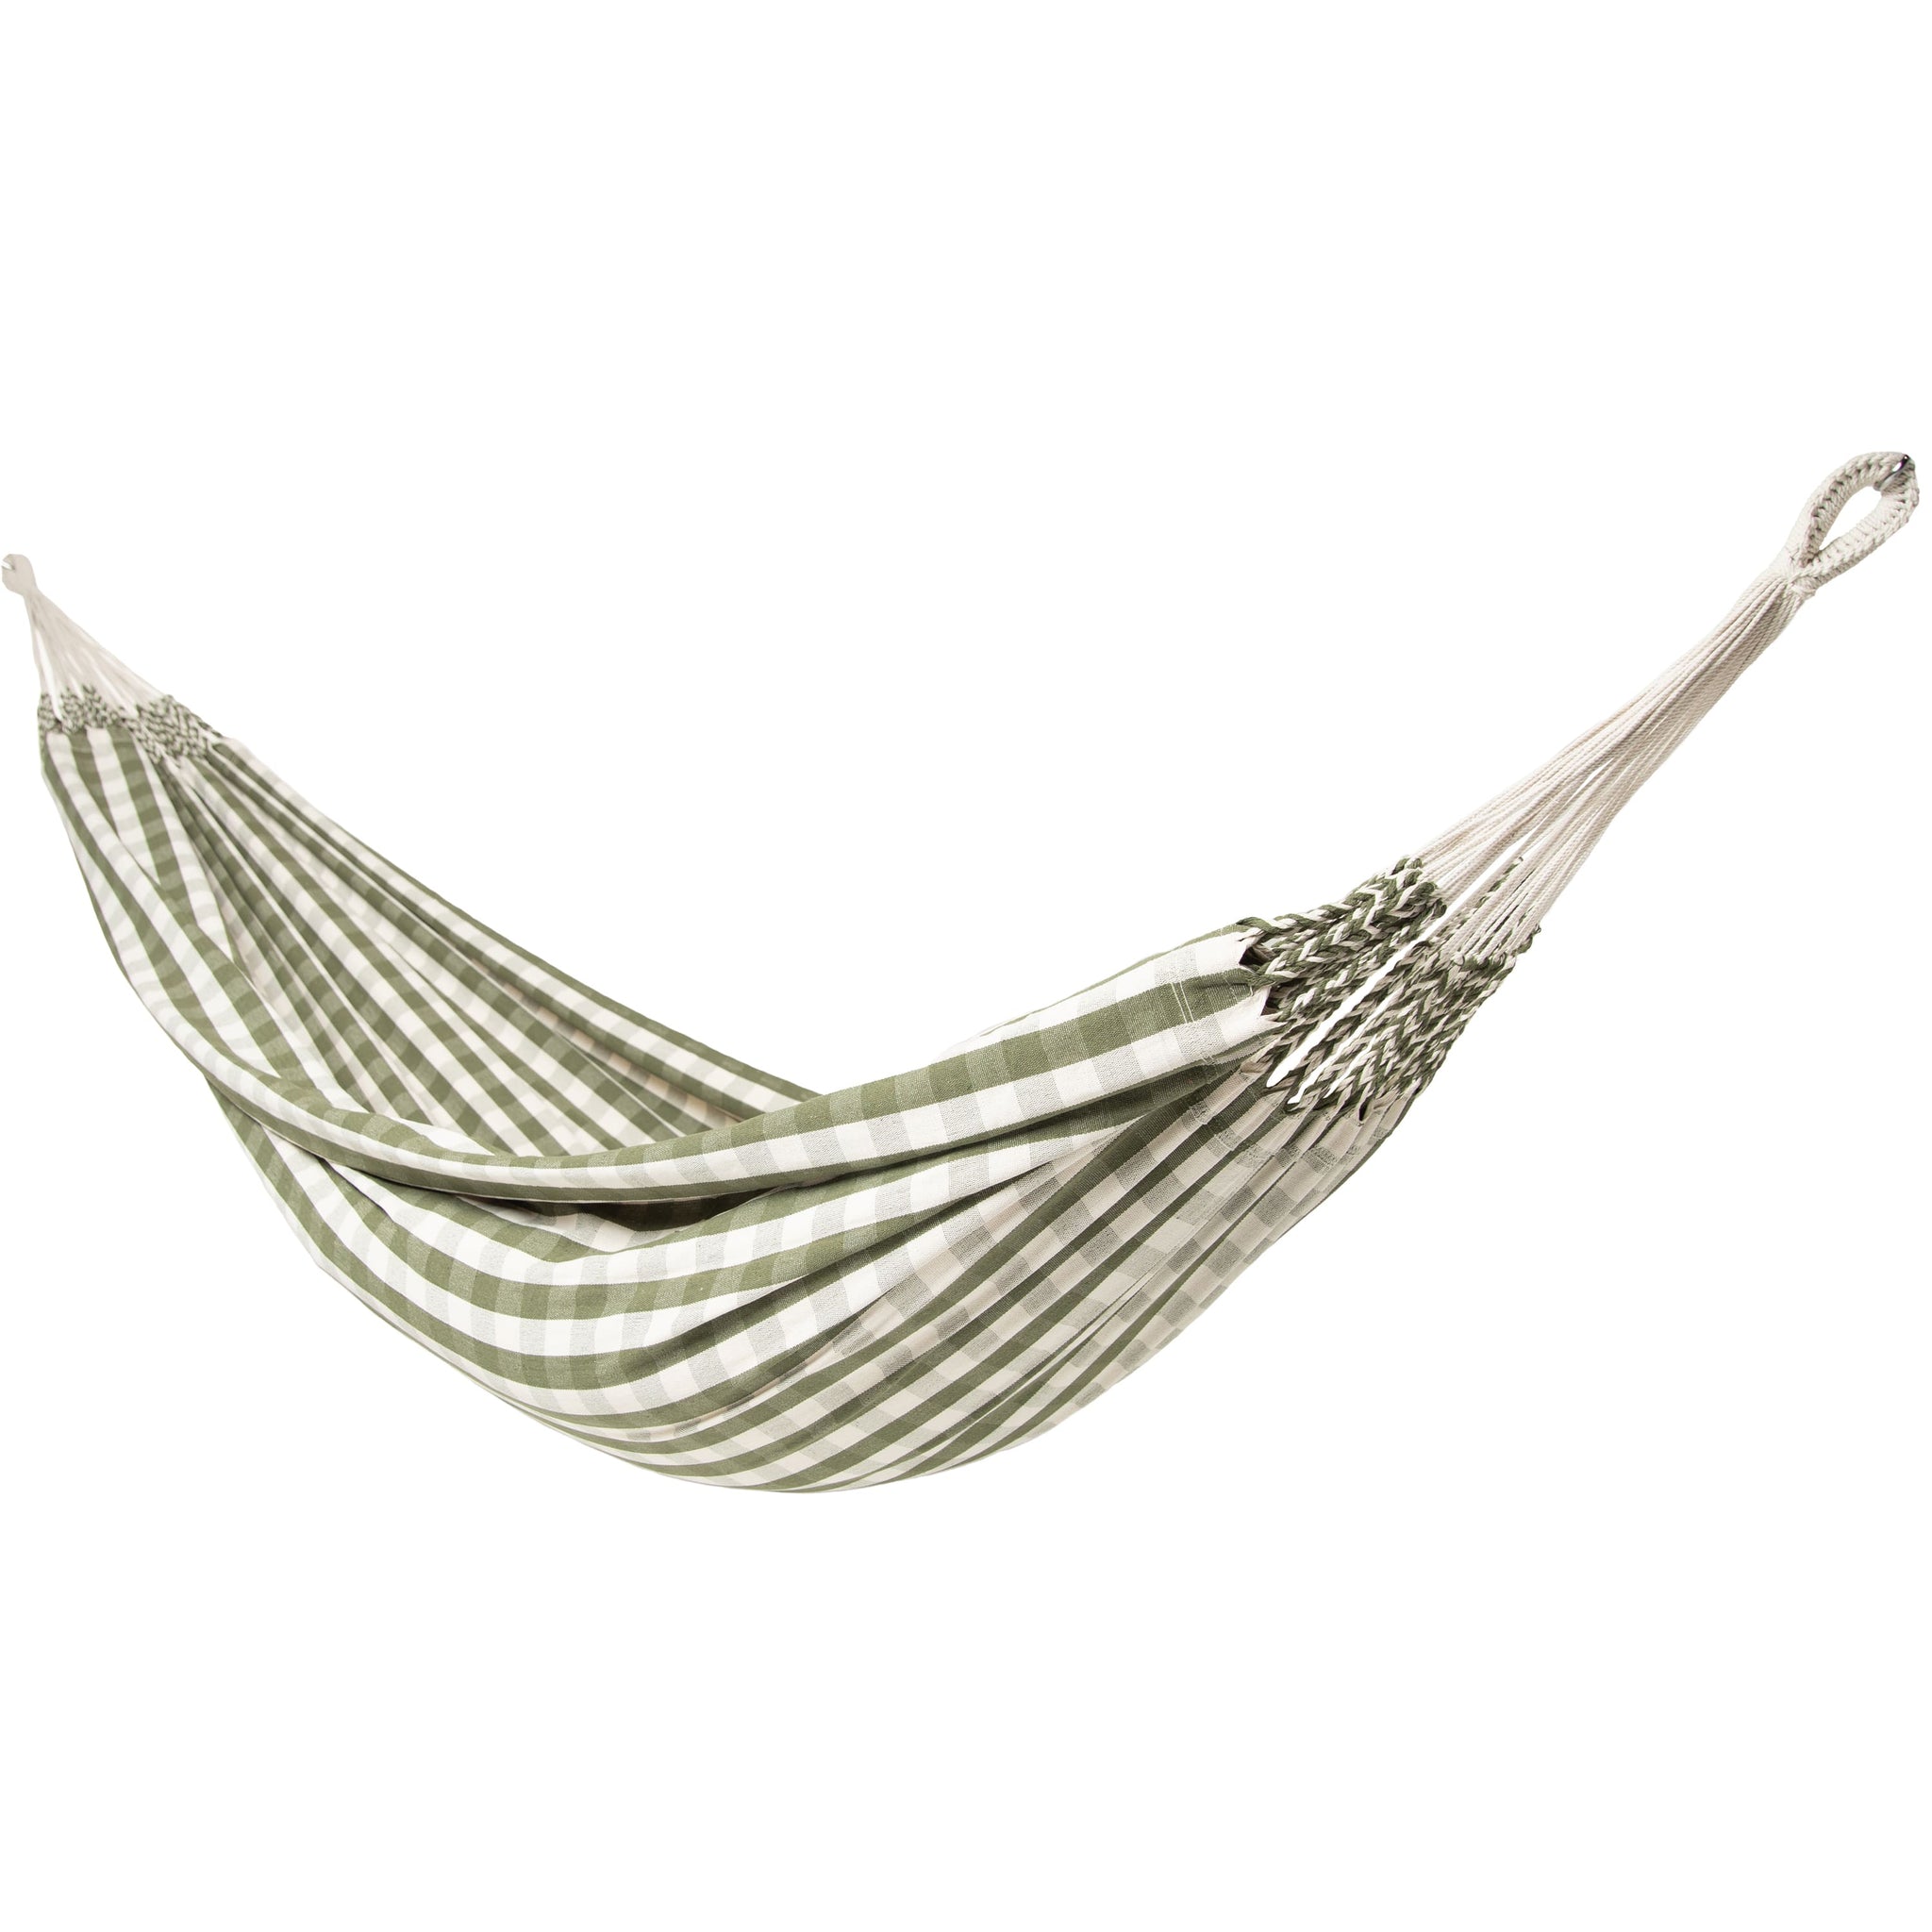 305 cm Universal Steel Hammock Stand & Authentic Double Clasico Hammock in Olive